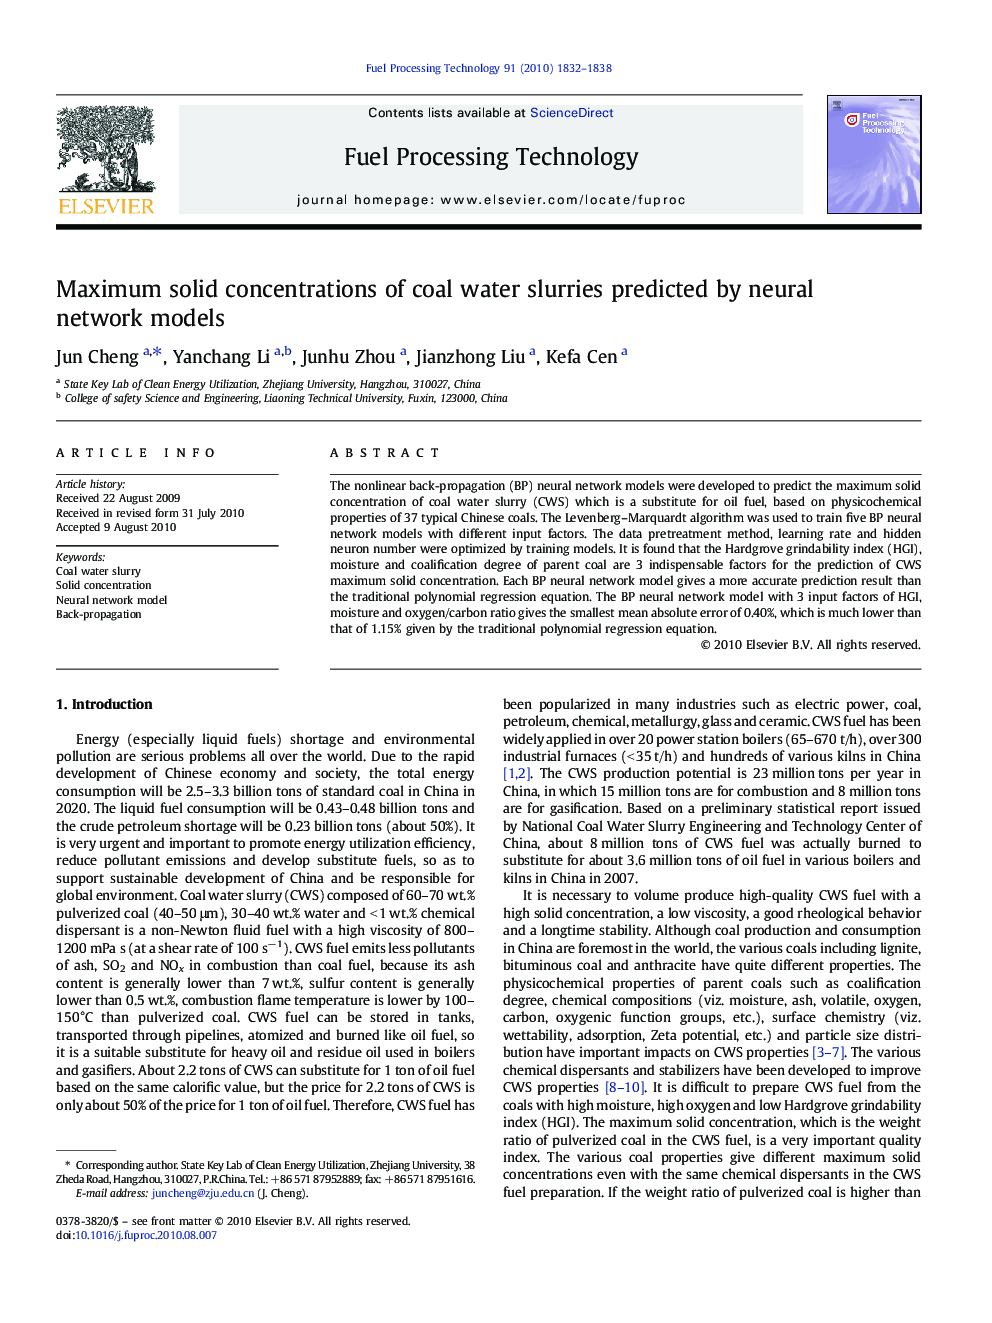 Maximum solid concentrations of coal water slurries predicted by neural network models